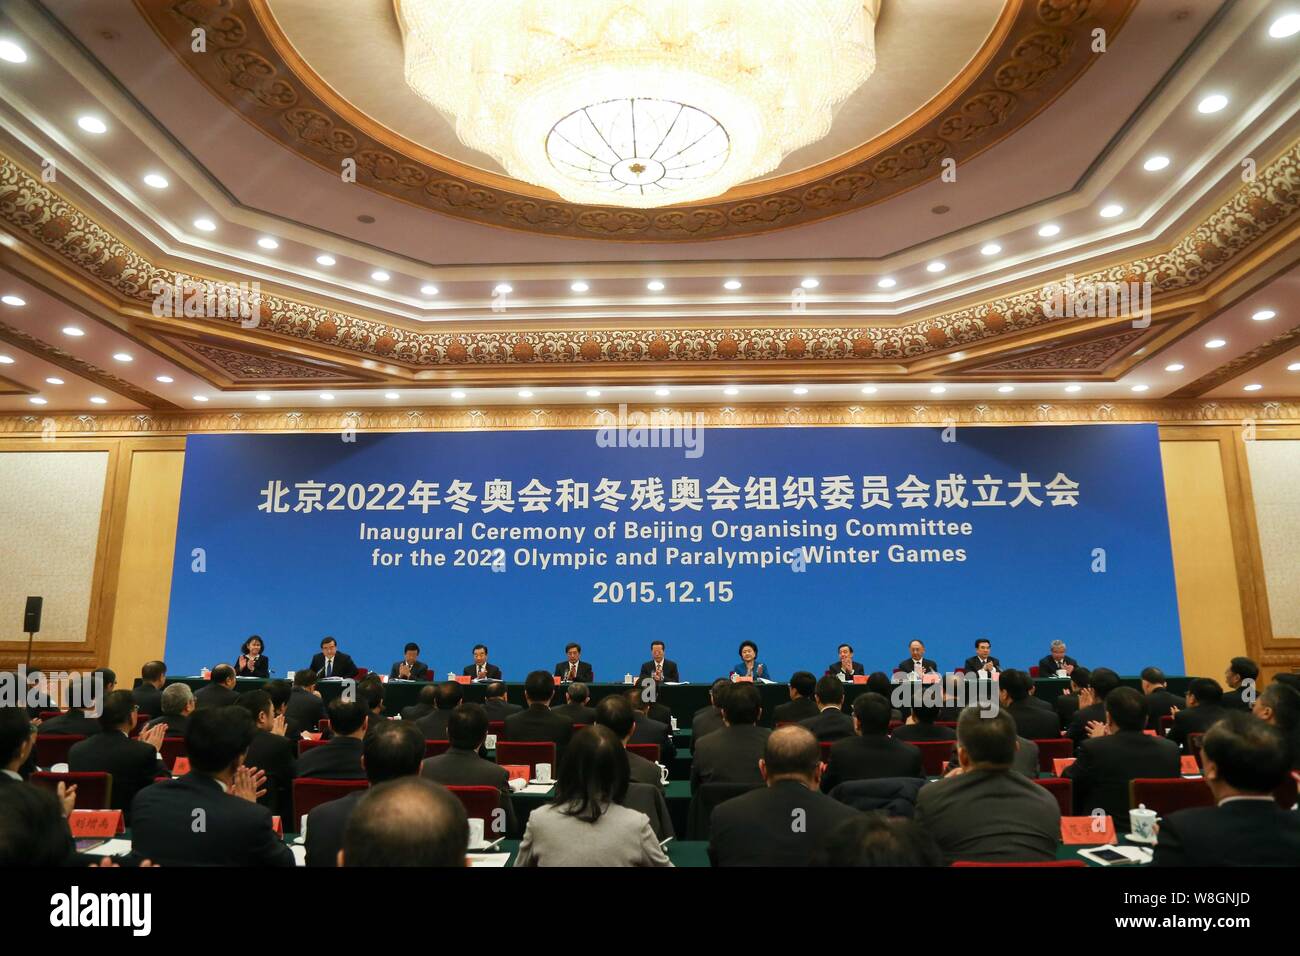 Chinese officials attend the inaugural ceremony of the Beijing Organizing Committee for the 2022 Olympic and Paralympic Winter Games in Beijing, China Stock Photo